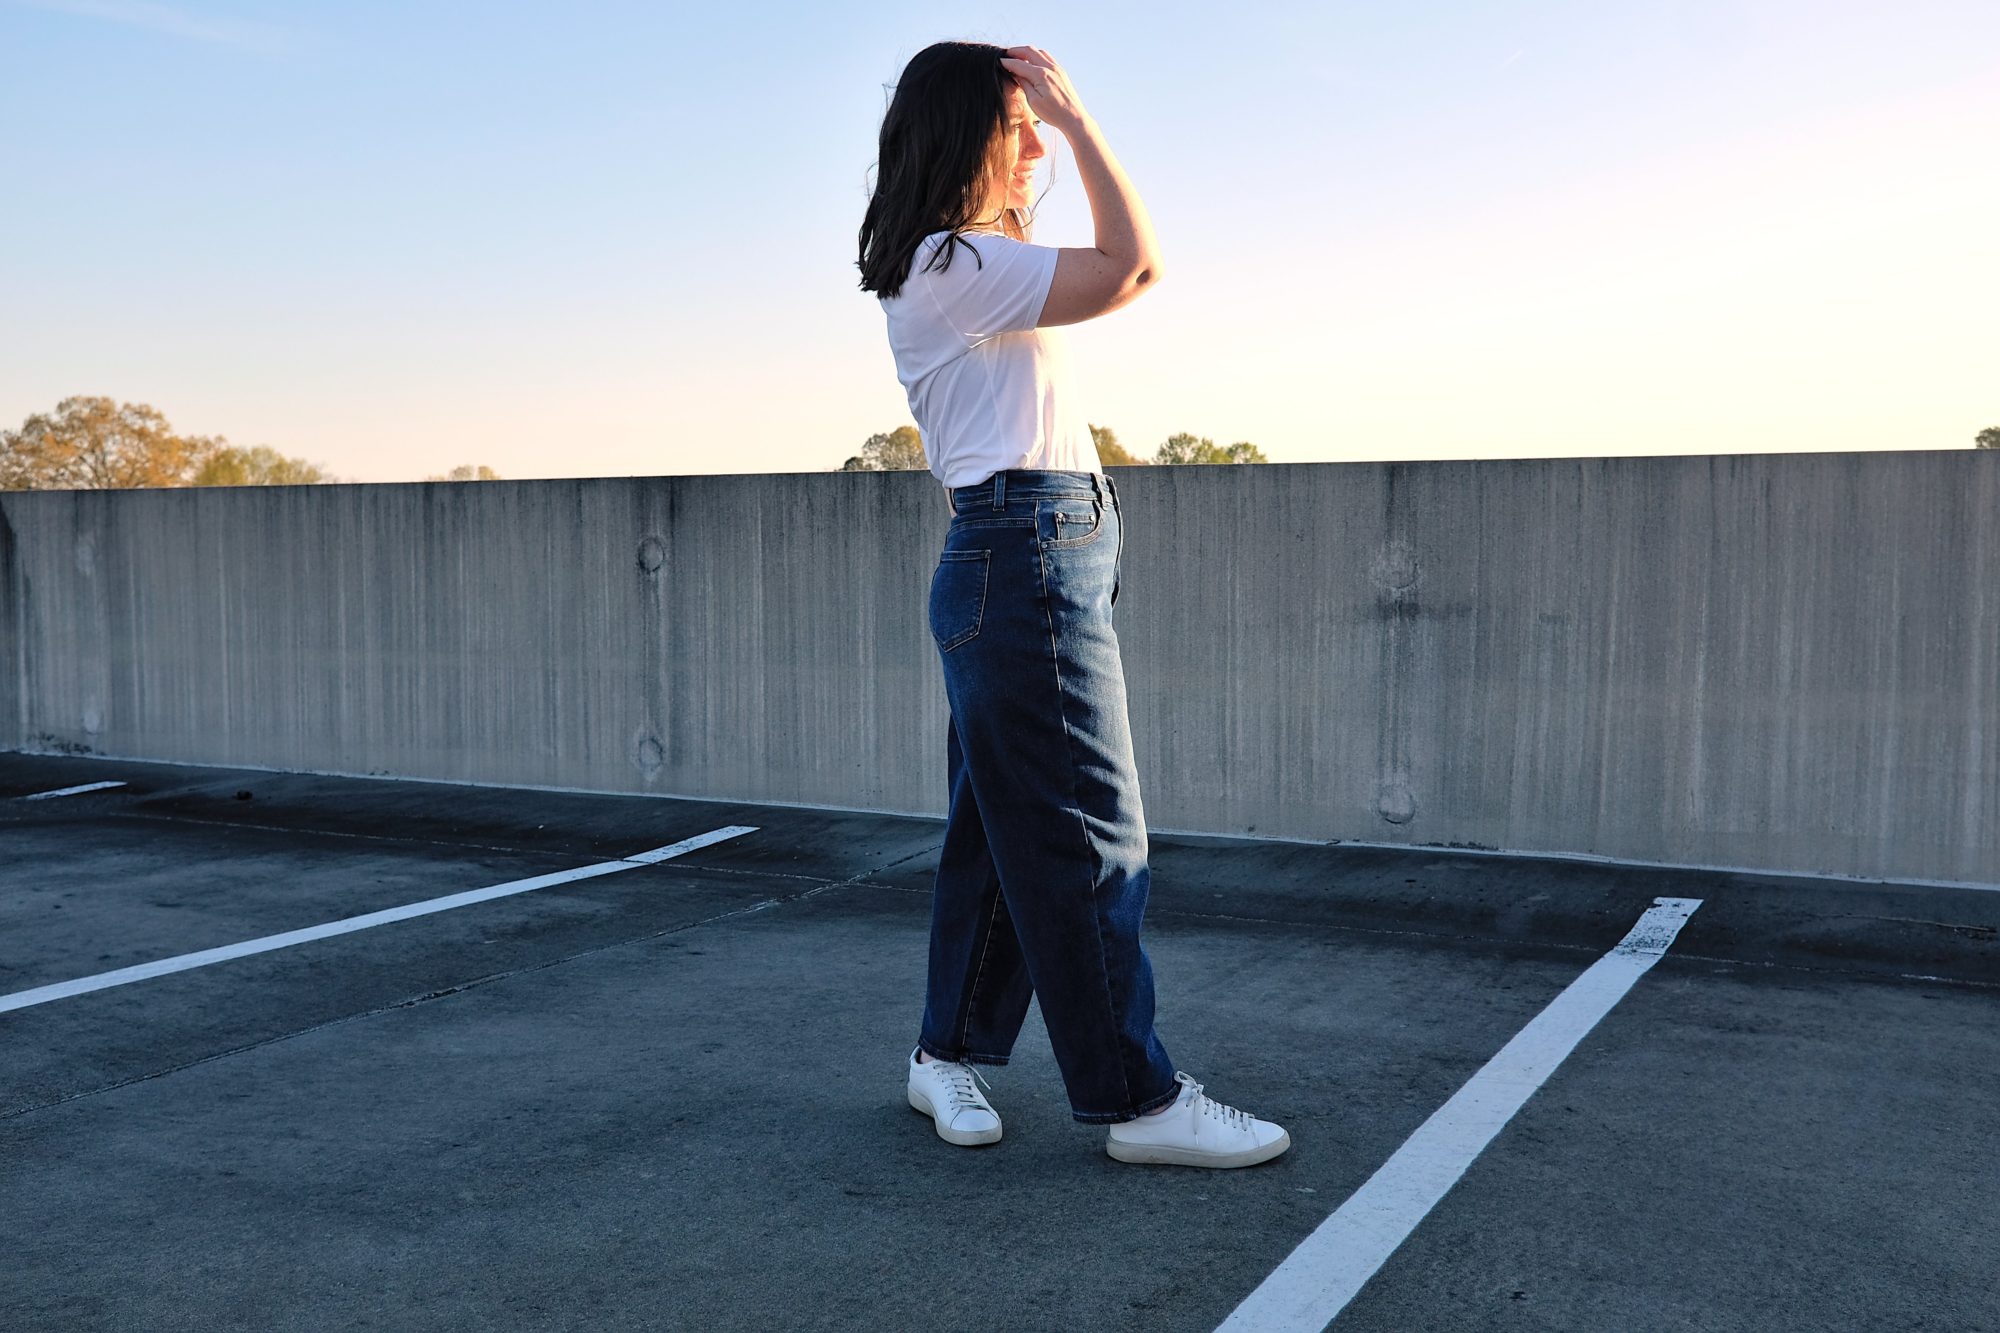 Alyssa wears a pair of jeans on the roof of a parking deck